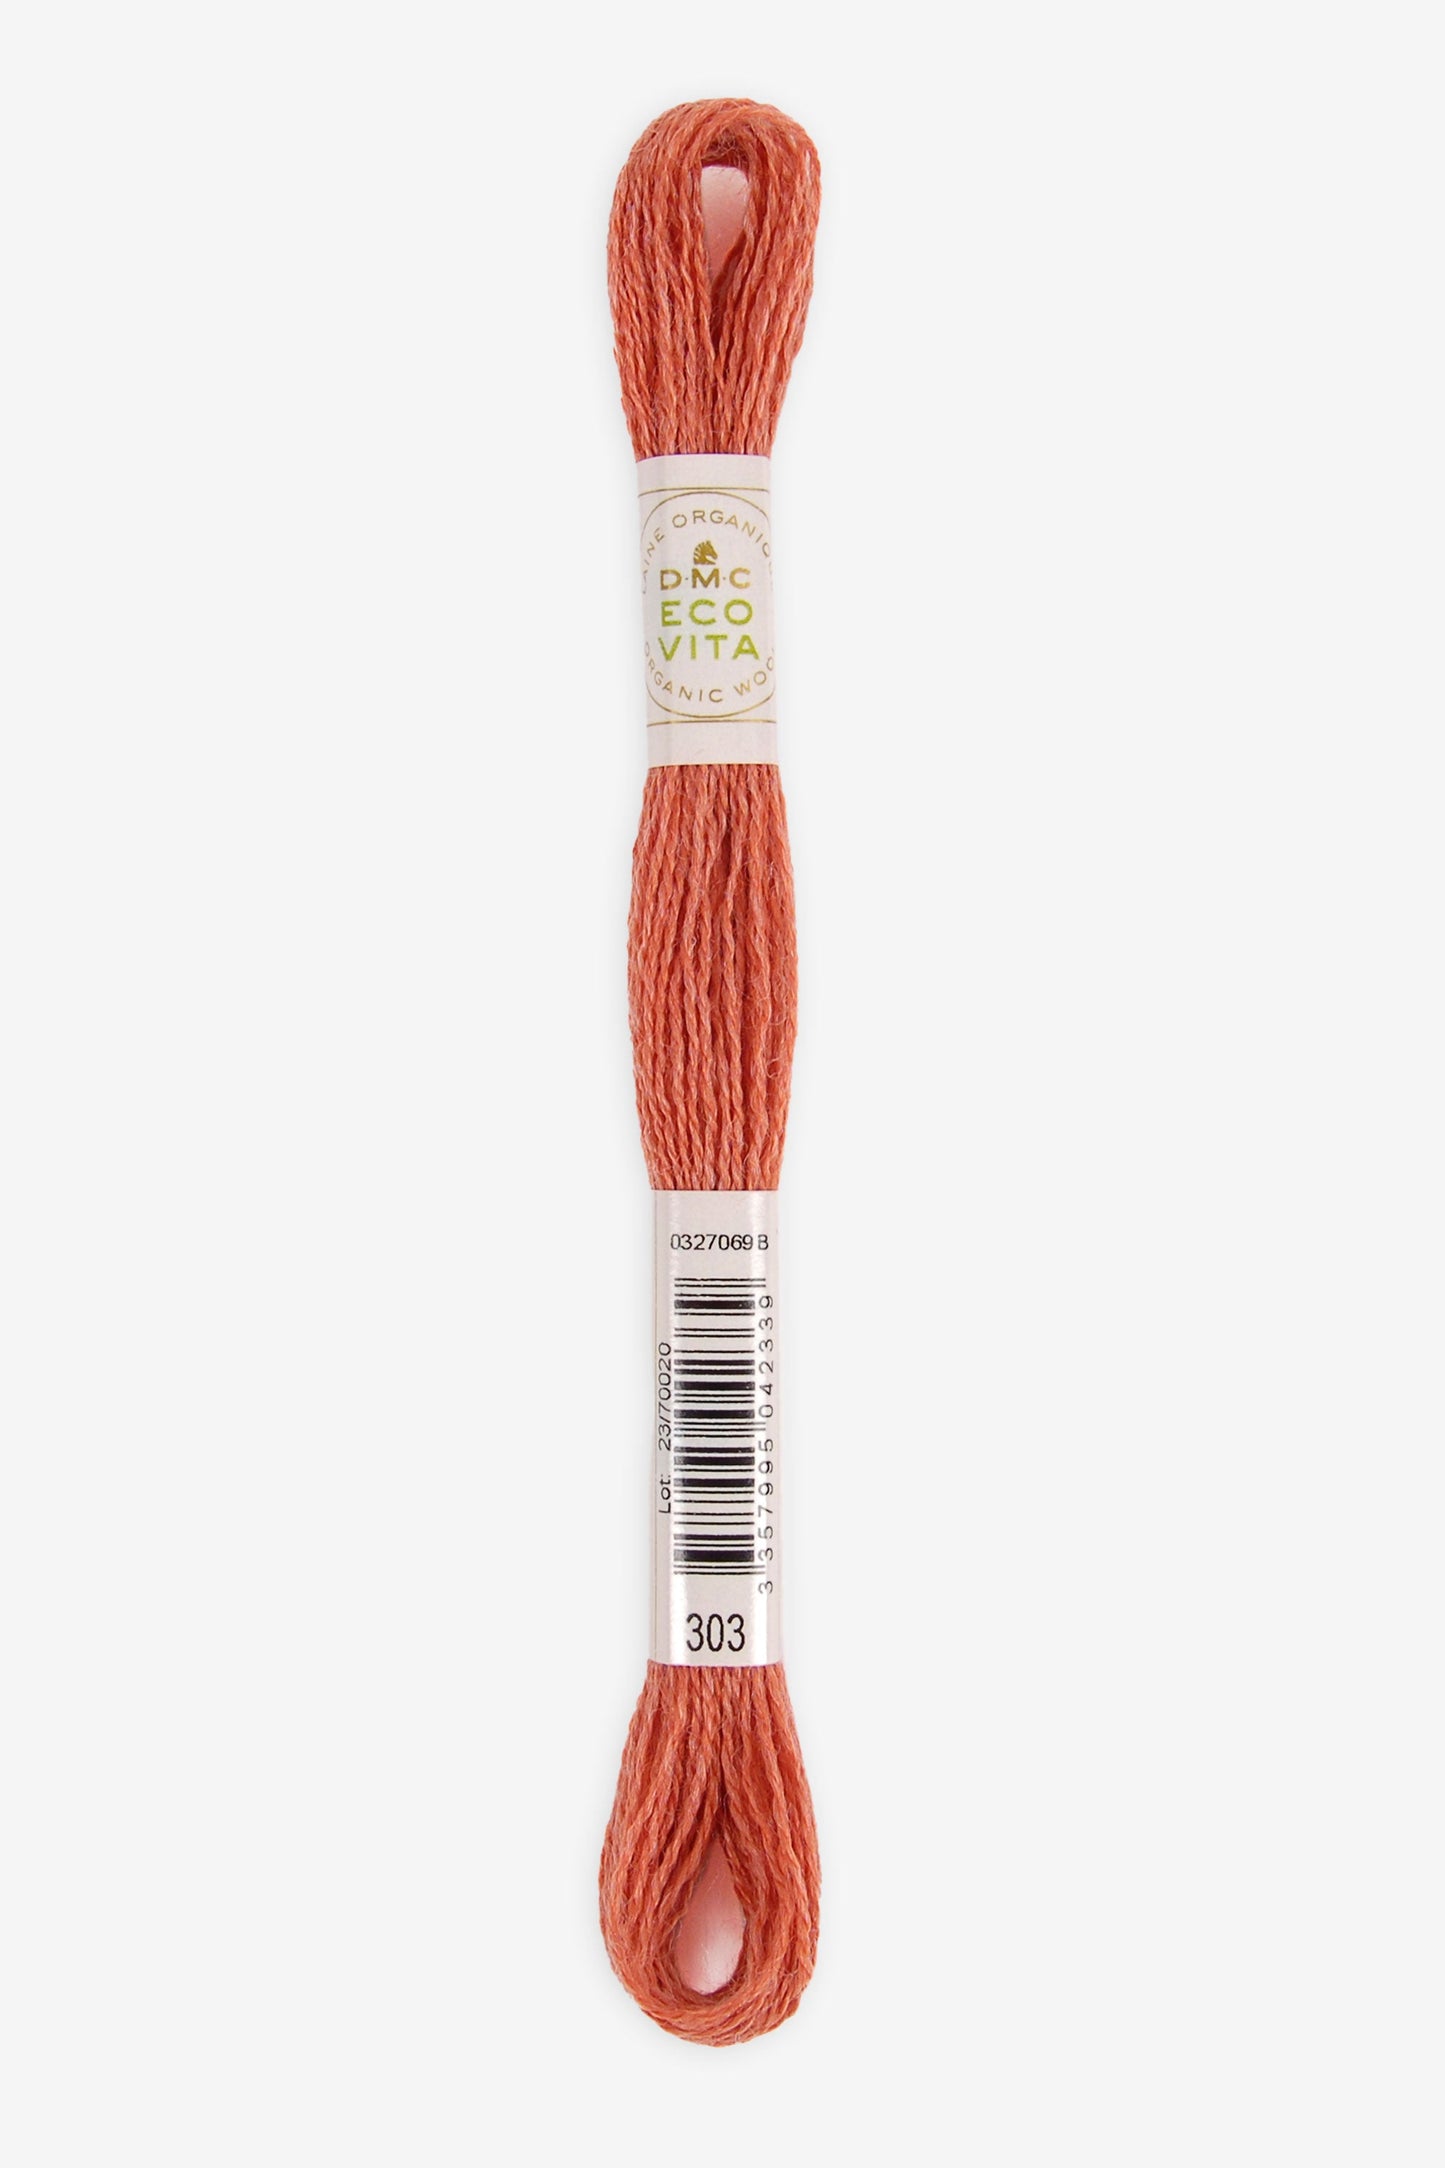 Single skein of Eco Vita Crewel Wool thread from DMC in color #303 against a white background